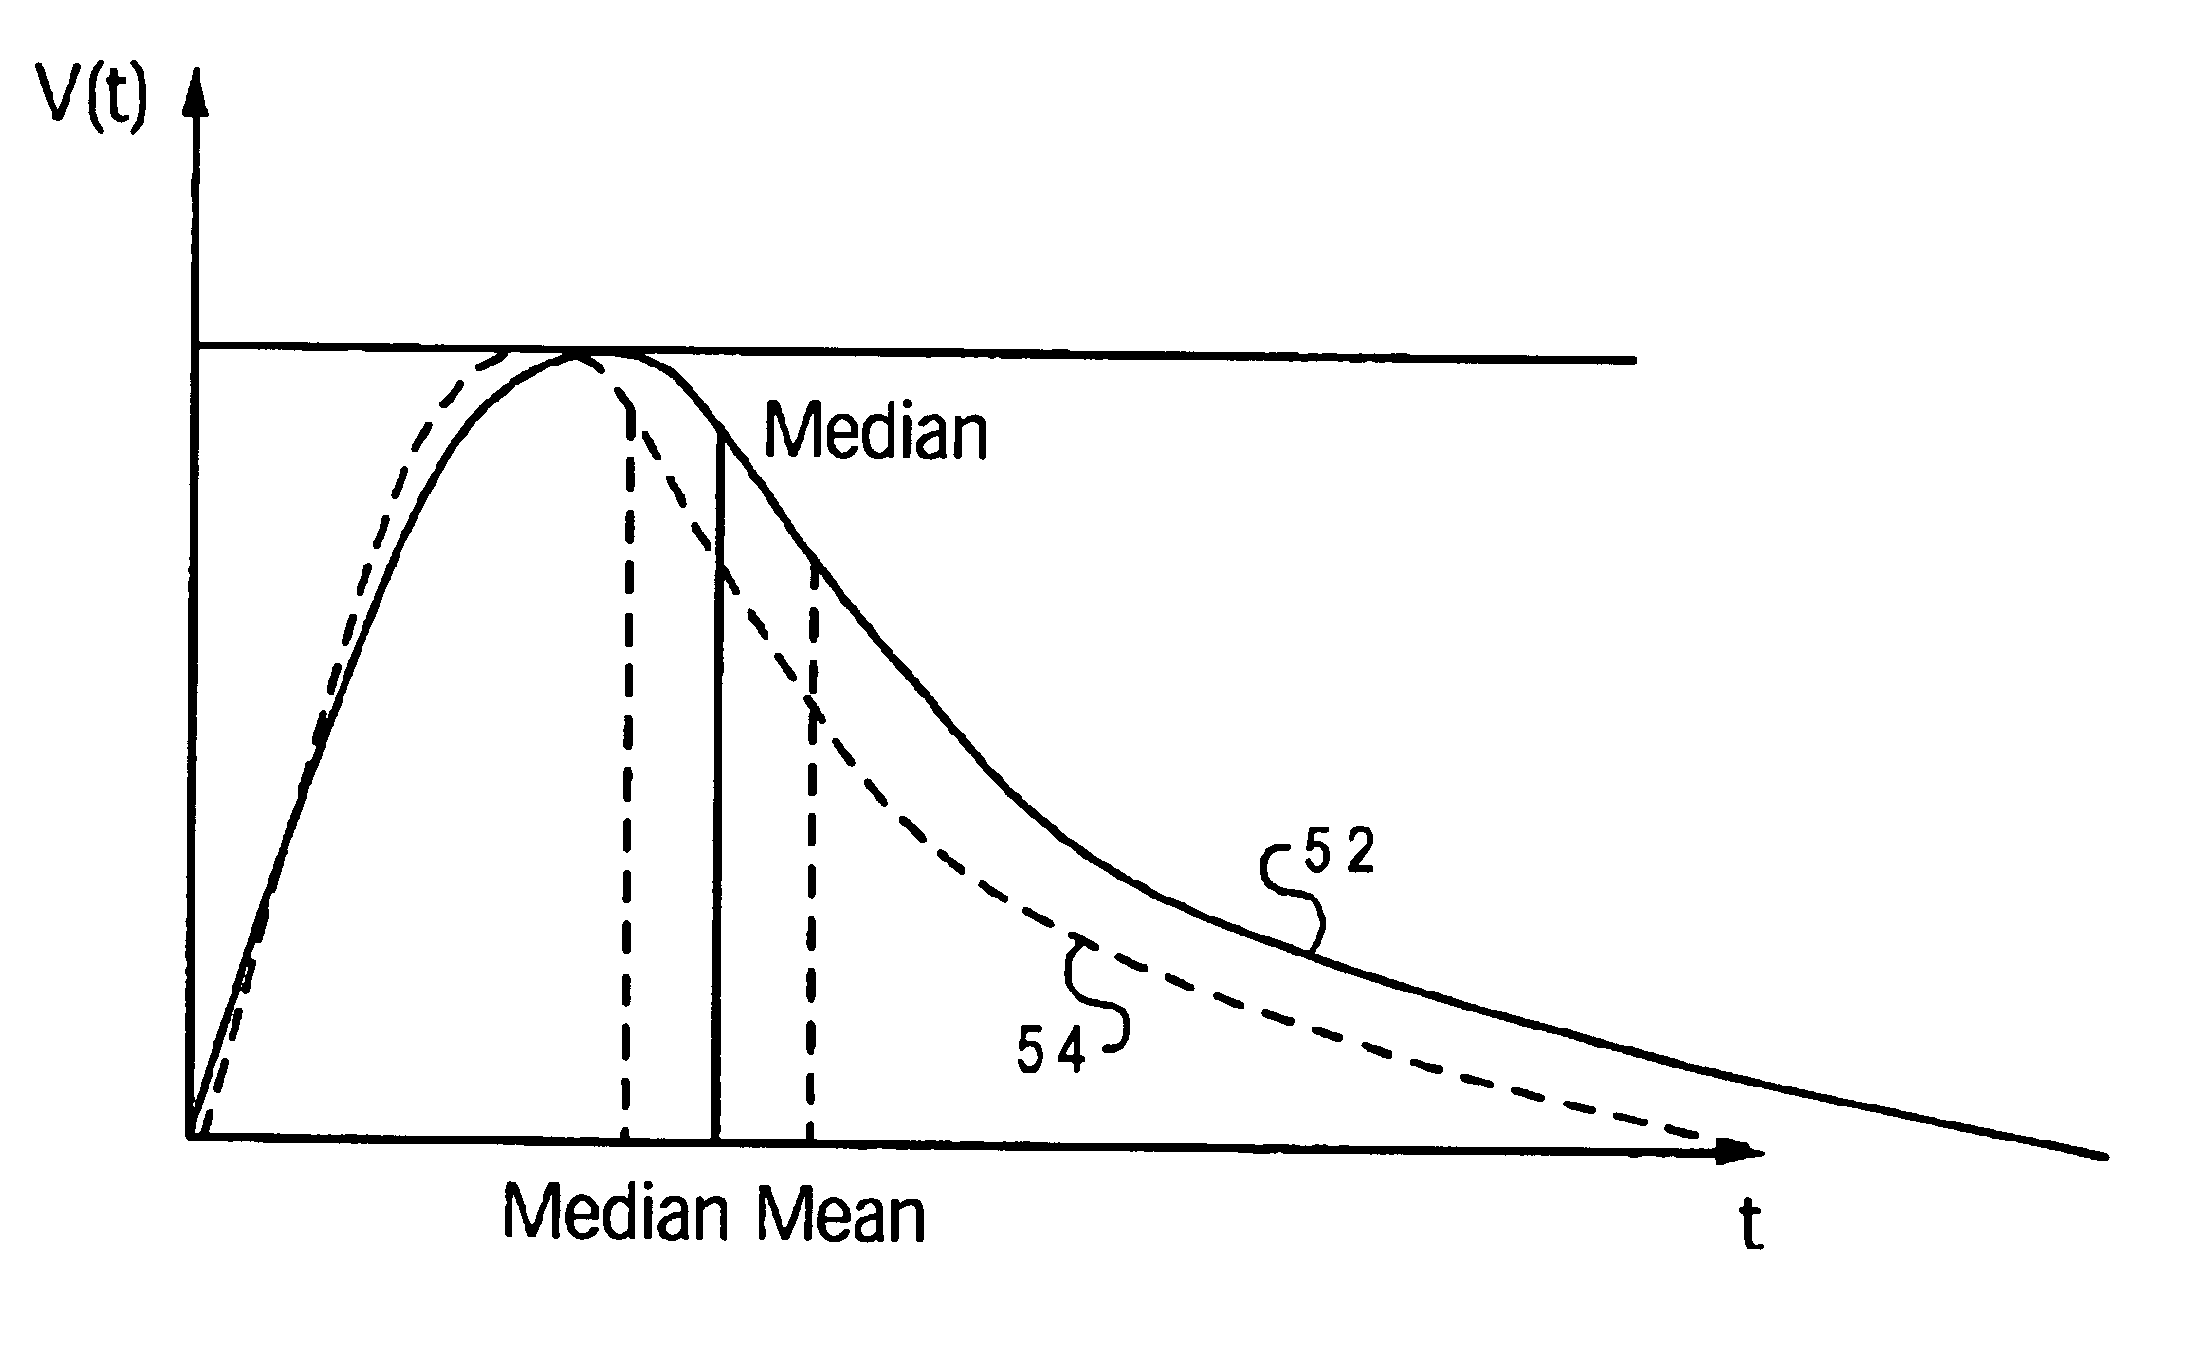 Interconnect delay and slew metrics based on the lognormal distribution